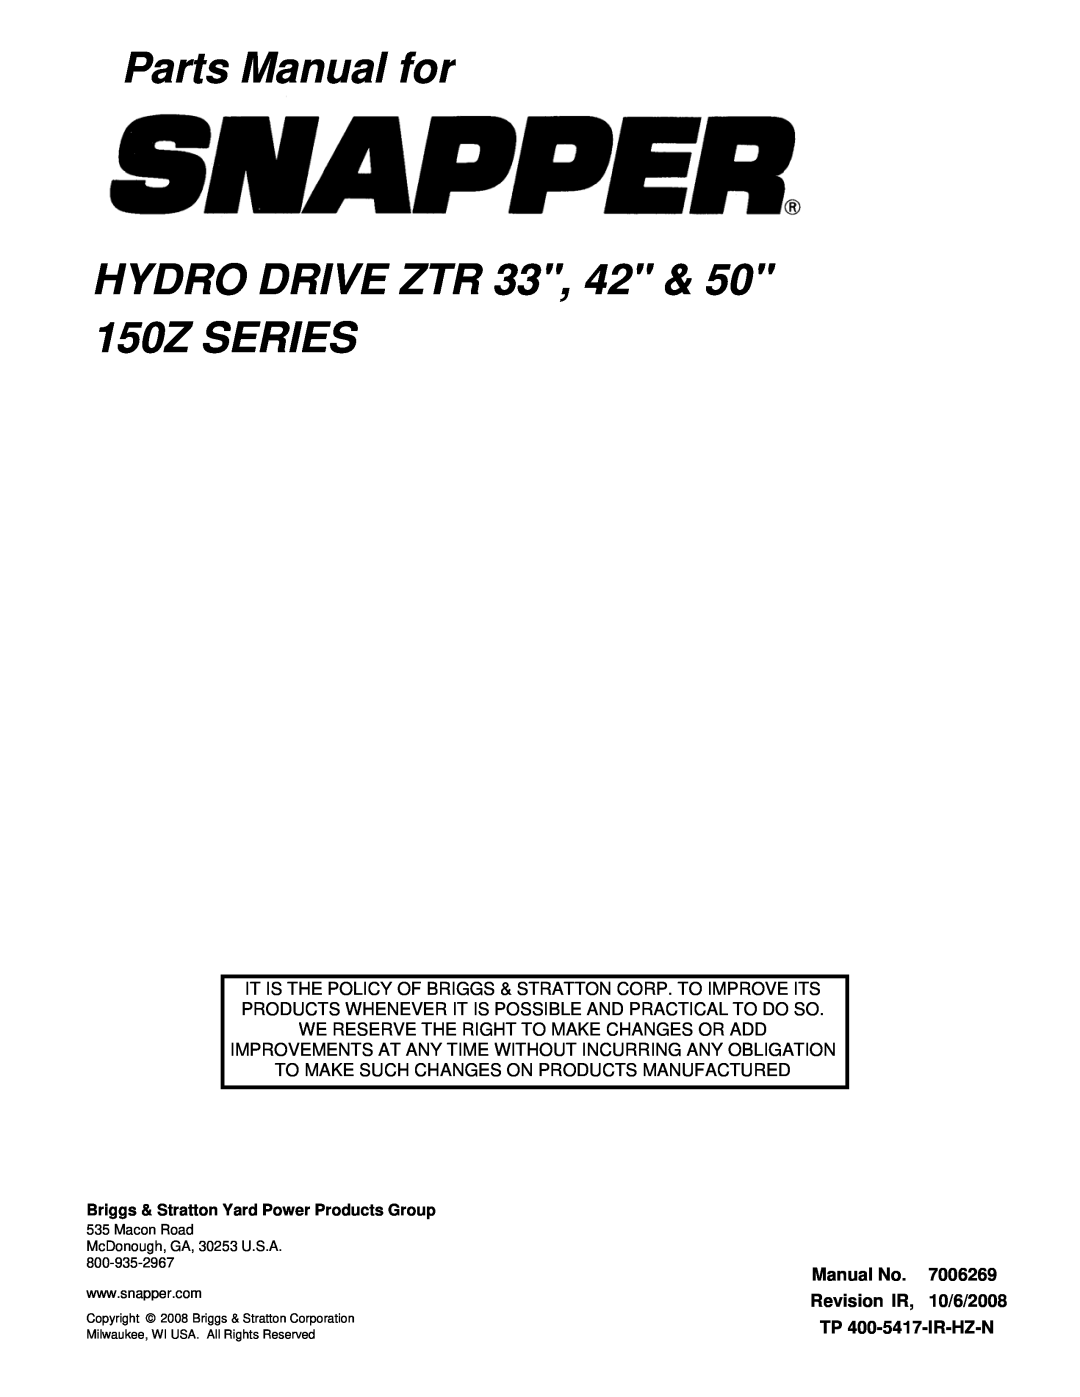 Snapper CSC2650 HYDRO DRIVE ZTR 33, 42 & 50 150Z SERIES, Parts Manual for, Manual No, 7006269, Revision IR, 10/6/2008 